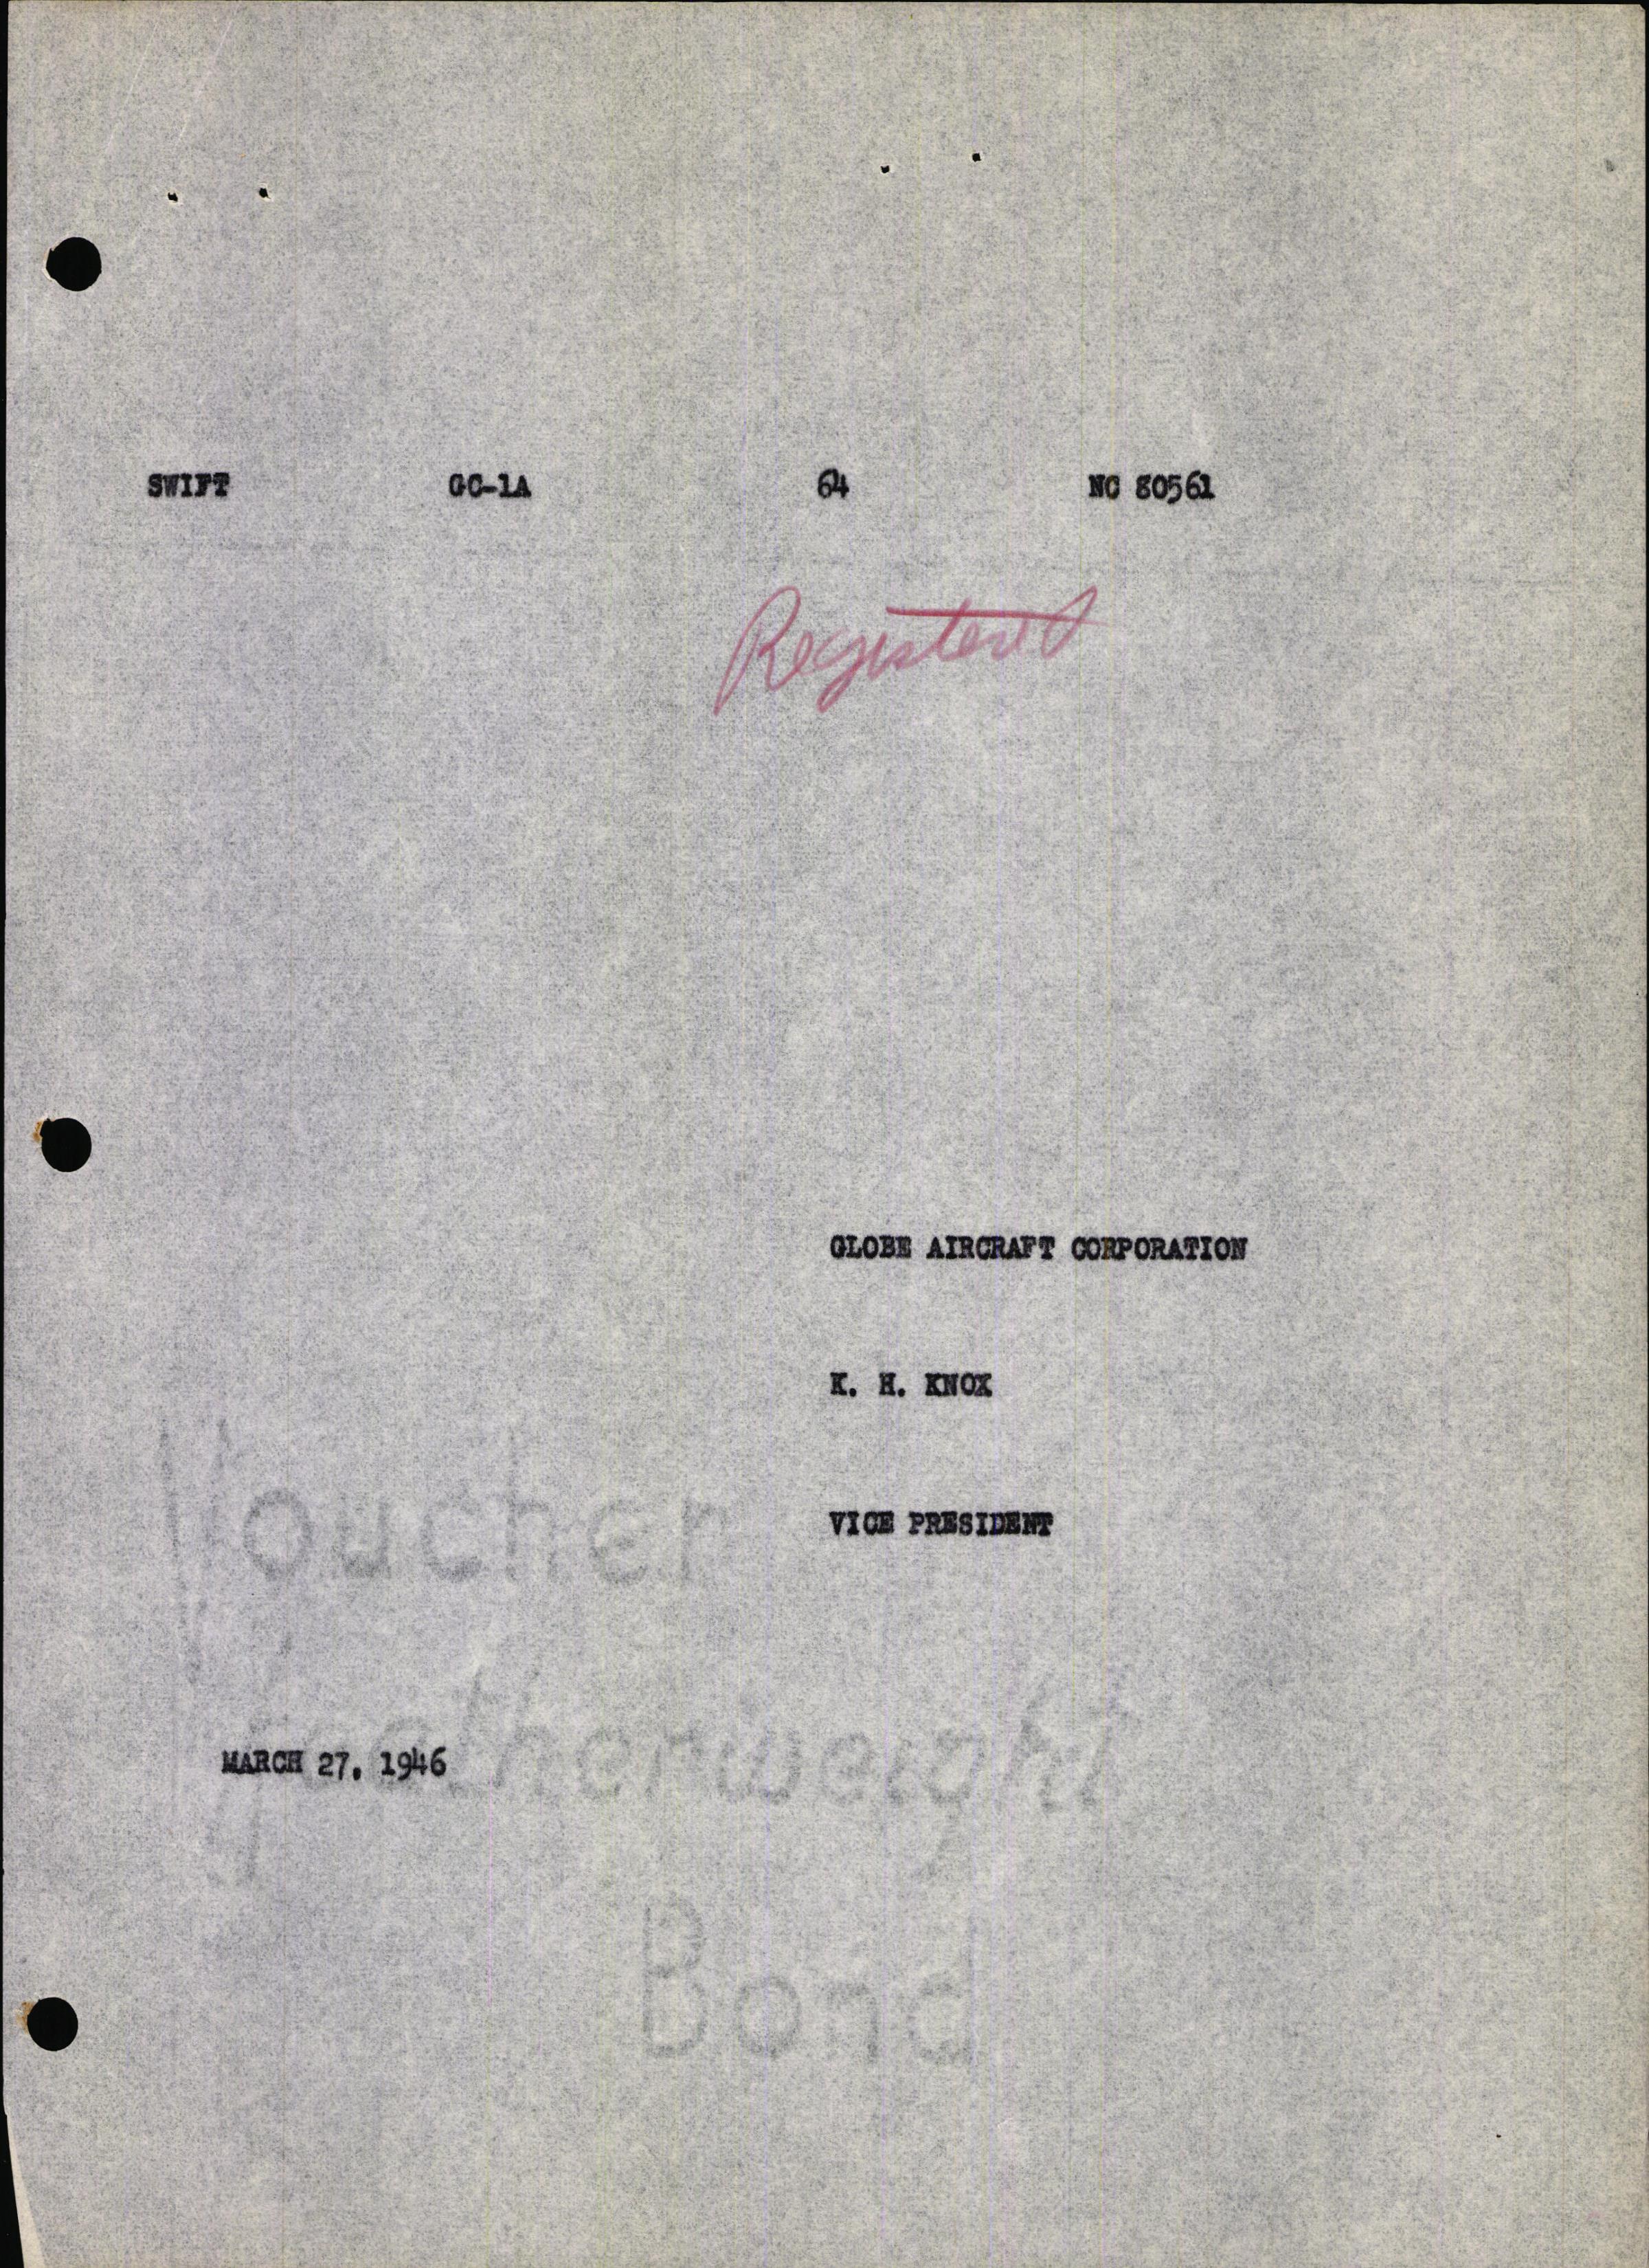 Sample page 5 from AirCorps Library document: Technical Information for Serial Number 64